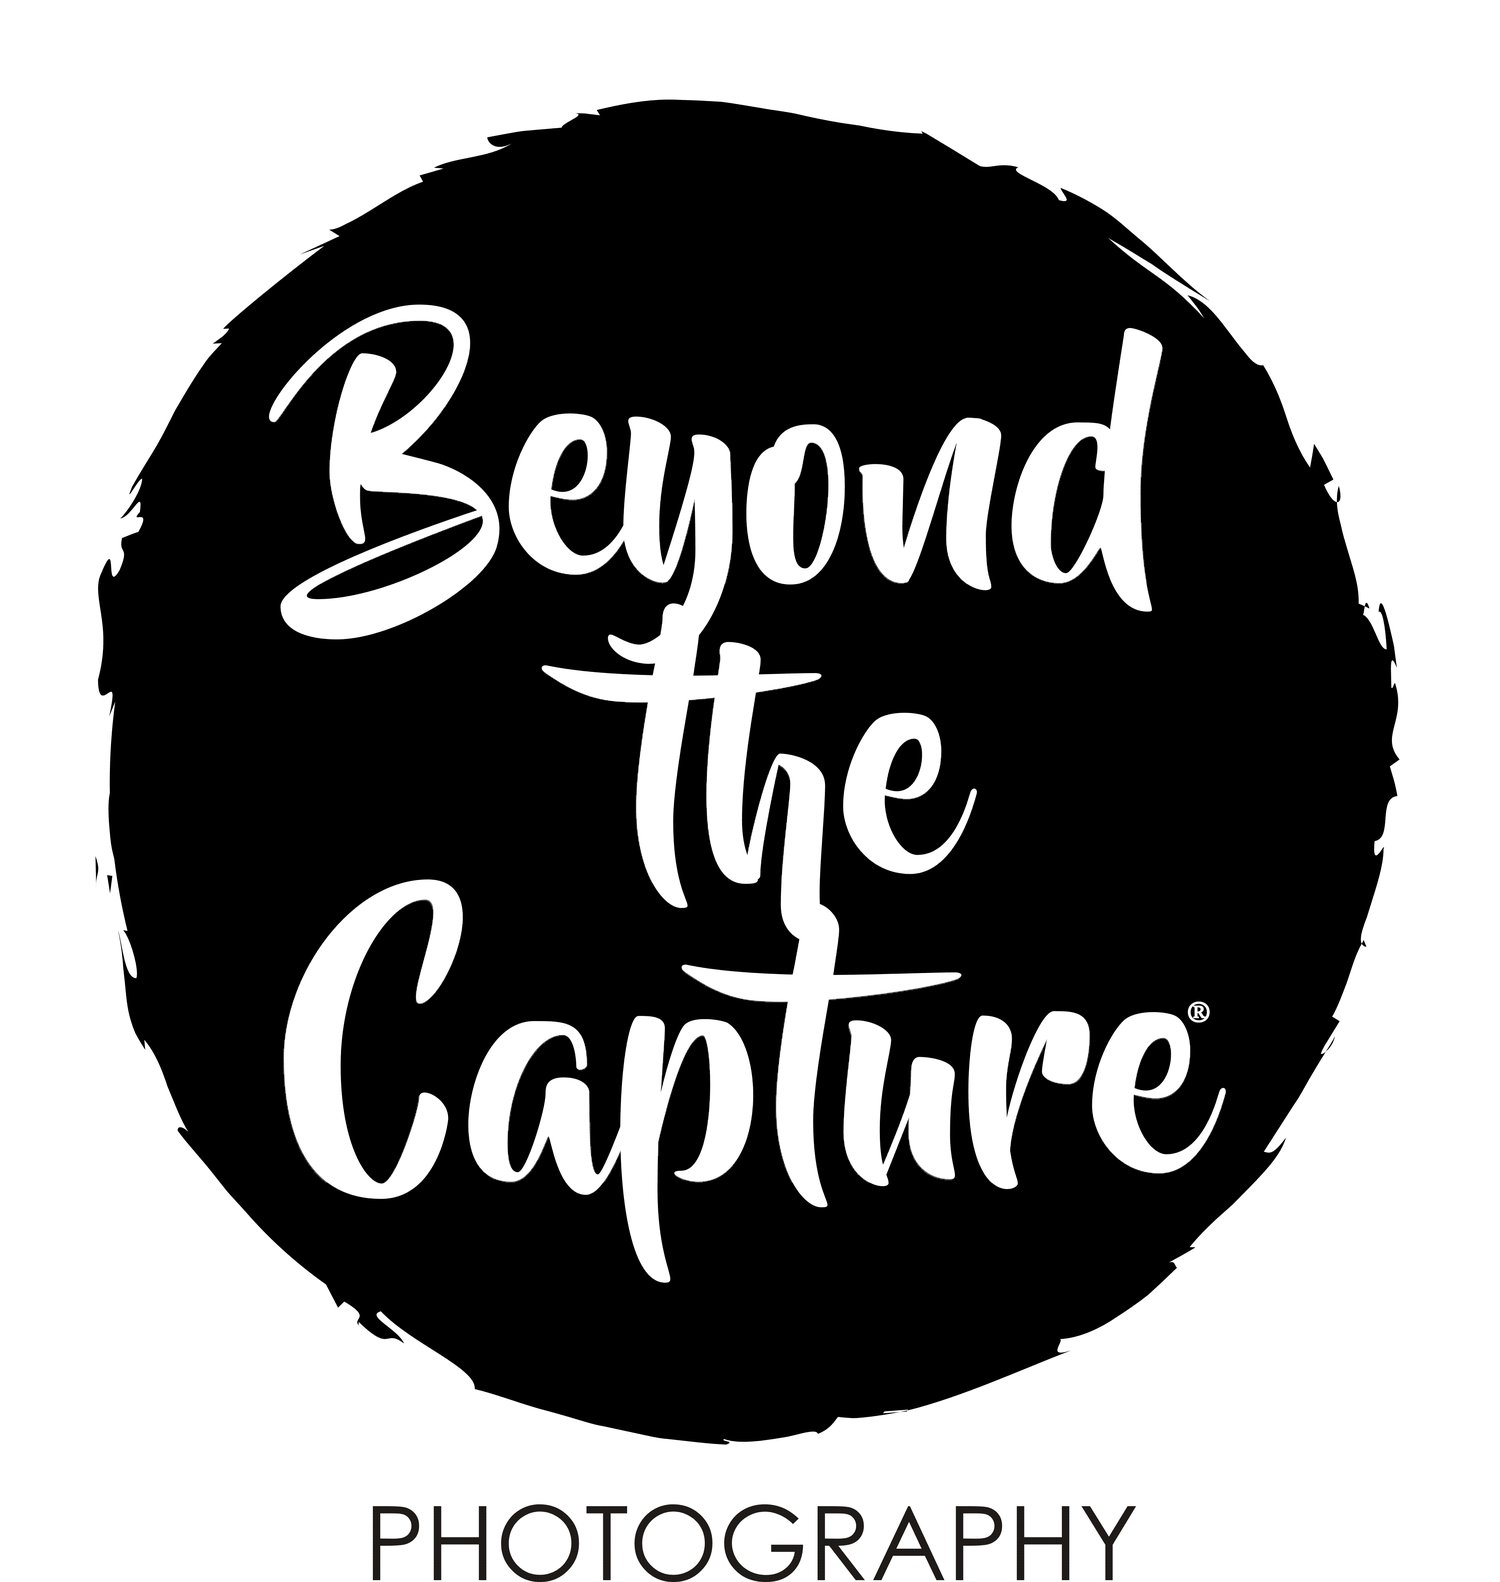 BEYOND THE CAPTURE PHOTOGRAPHY